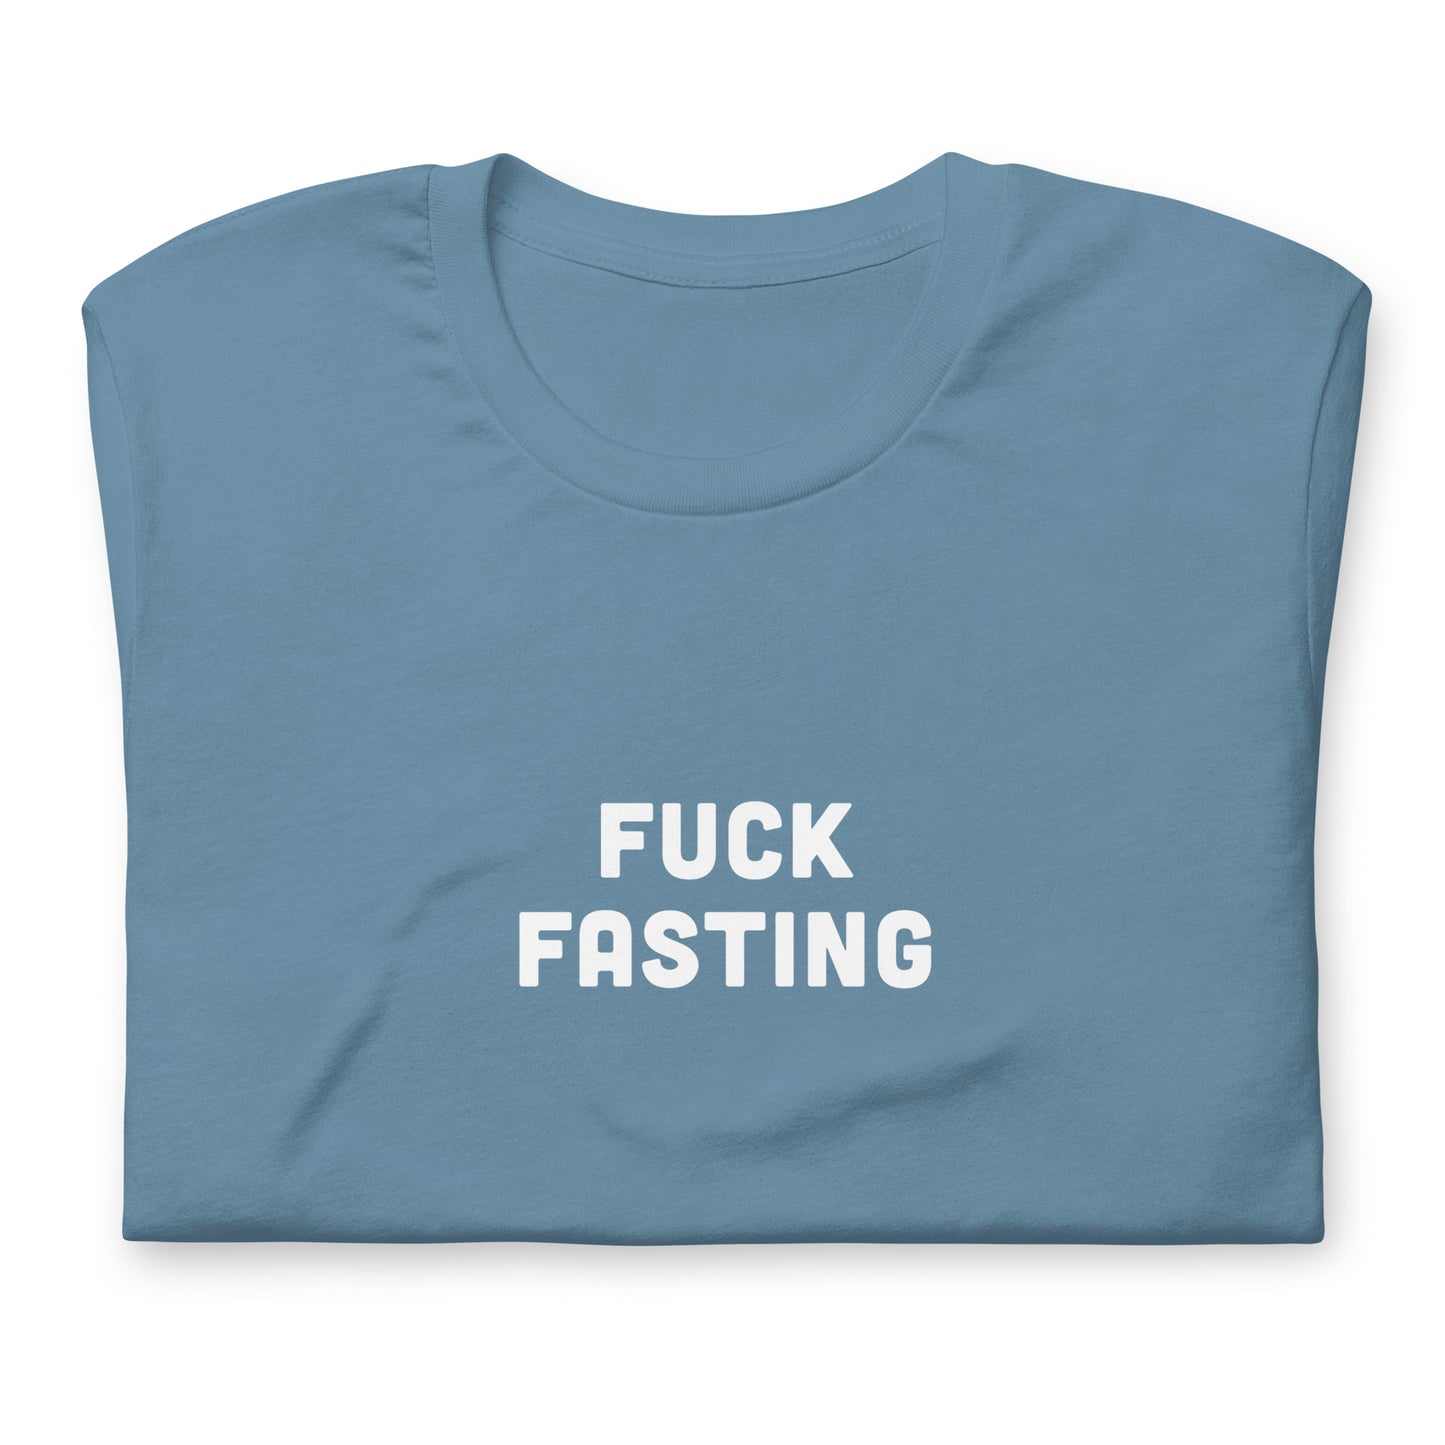 Fuck Fasting T-Shirt Size S Color Black